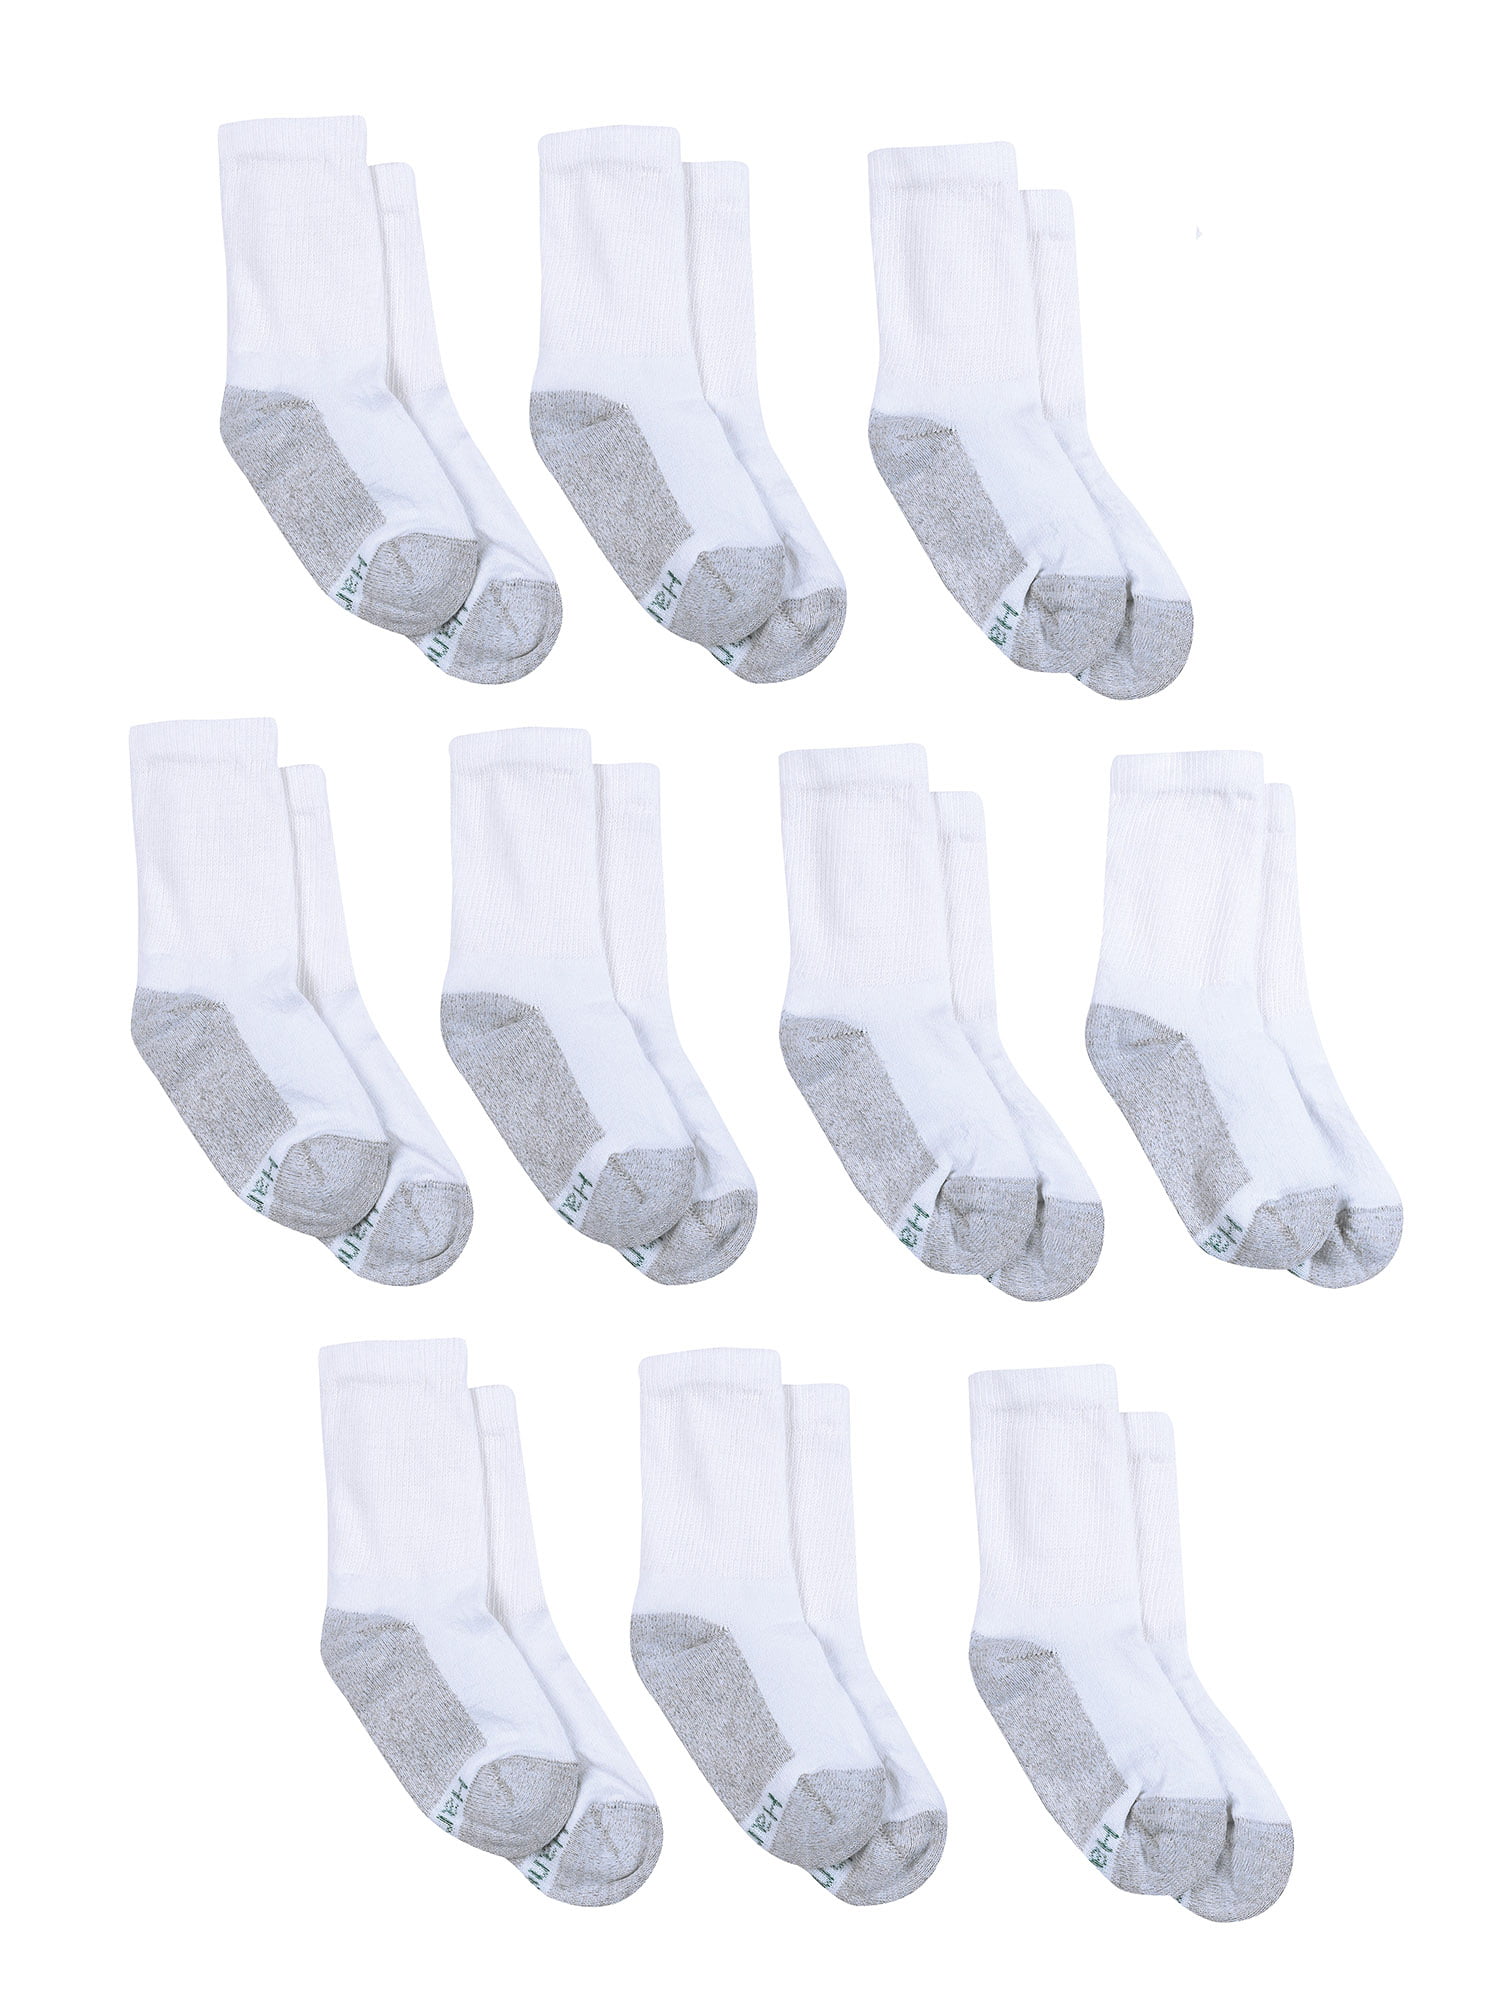 Pack of 6 Pair Hanes Toddler/Boys White Ankle Socks Extra Durable Sz M 9-2.5 